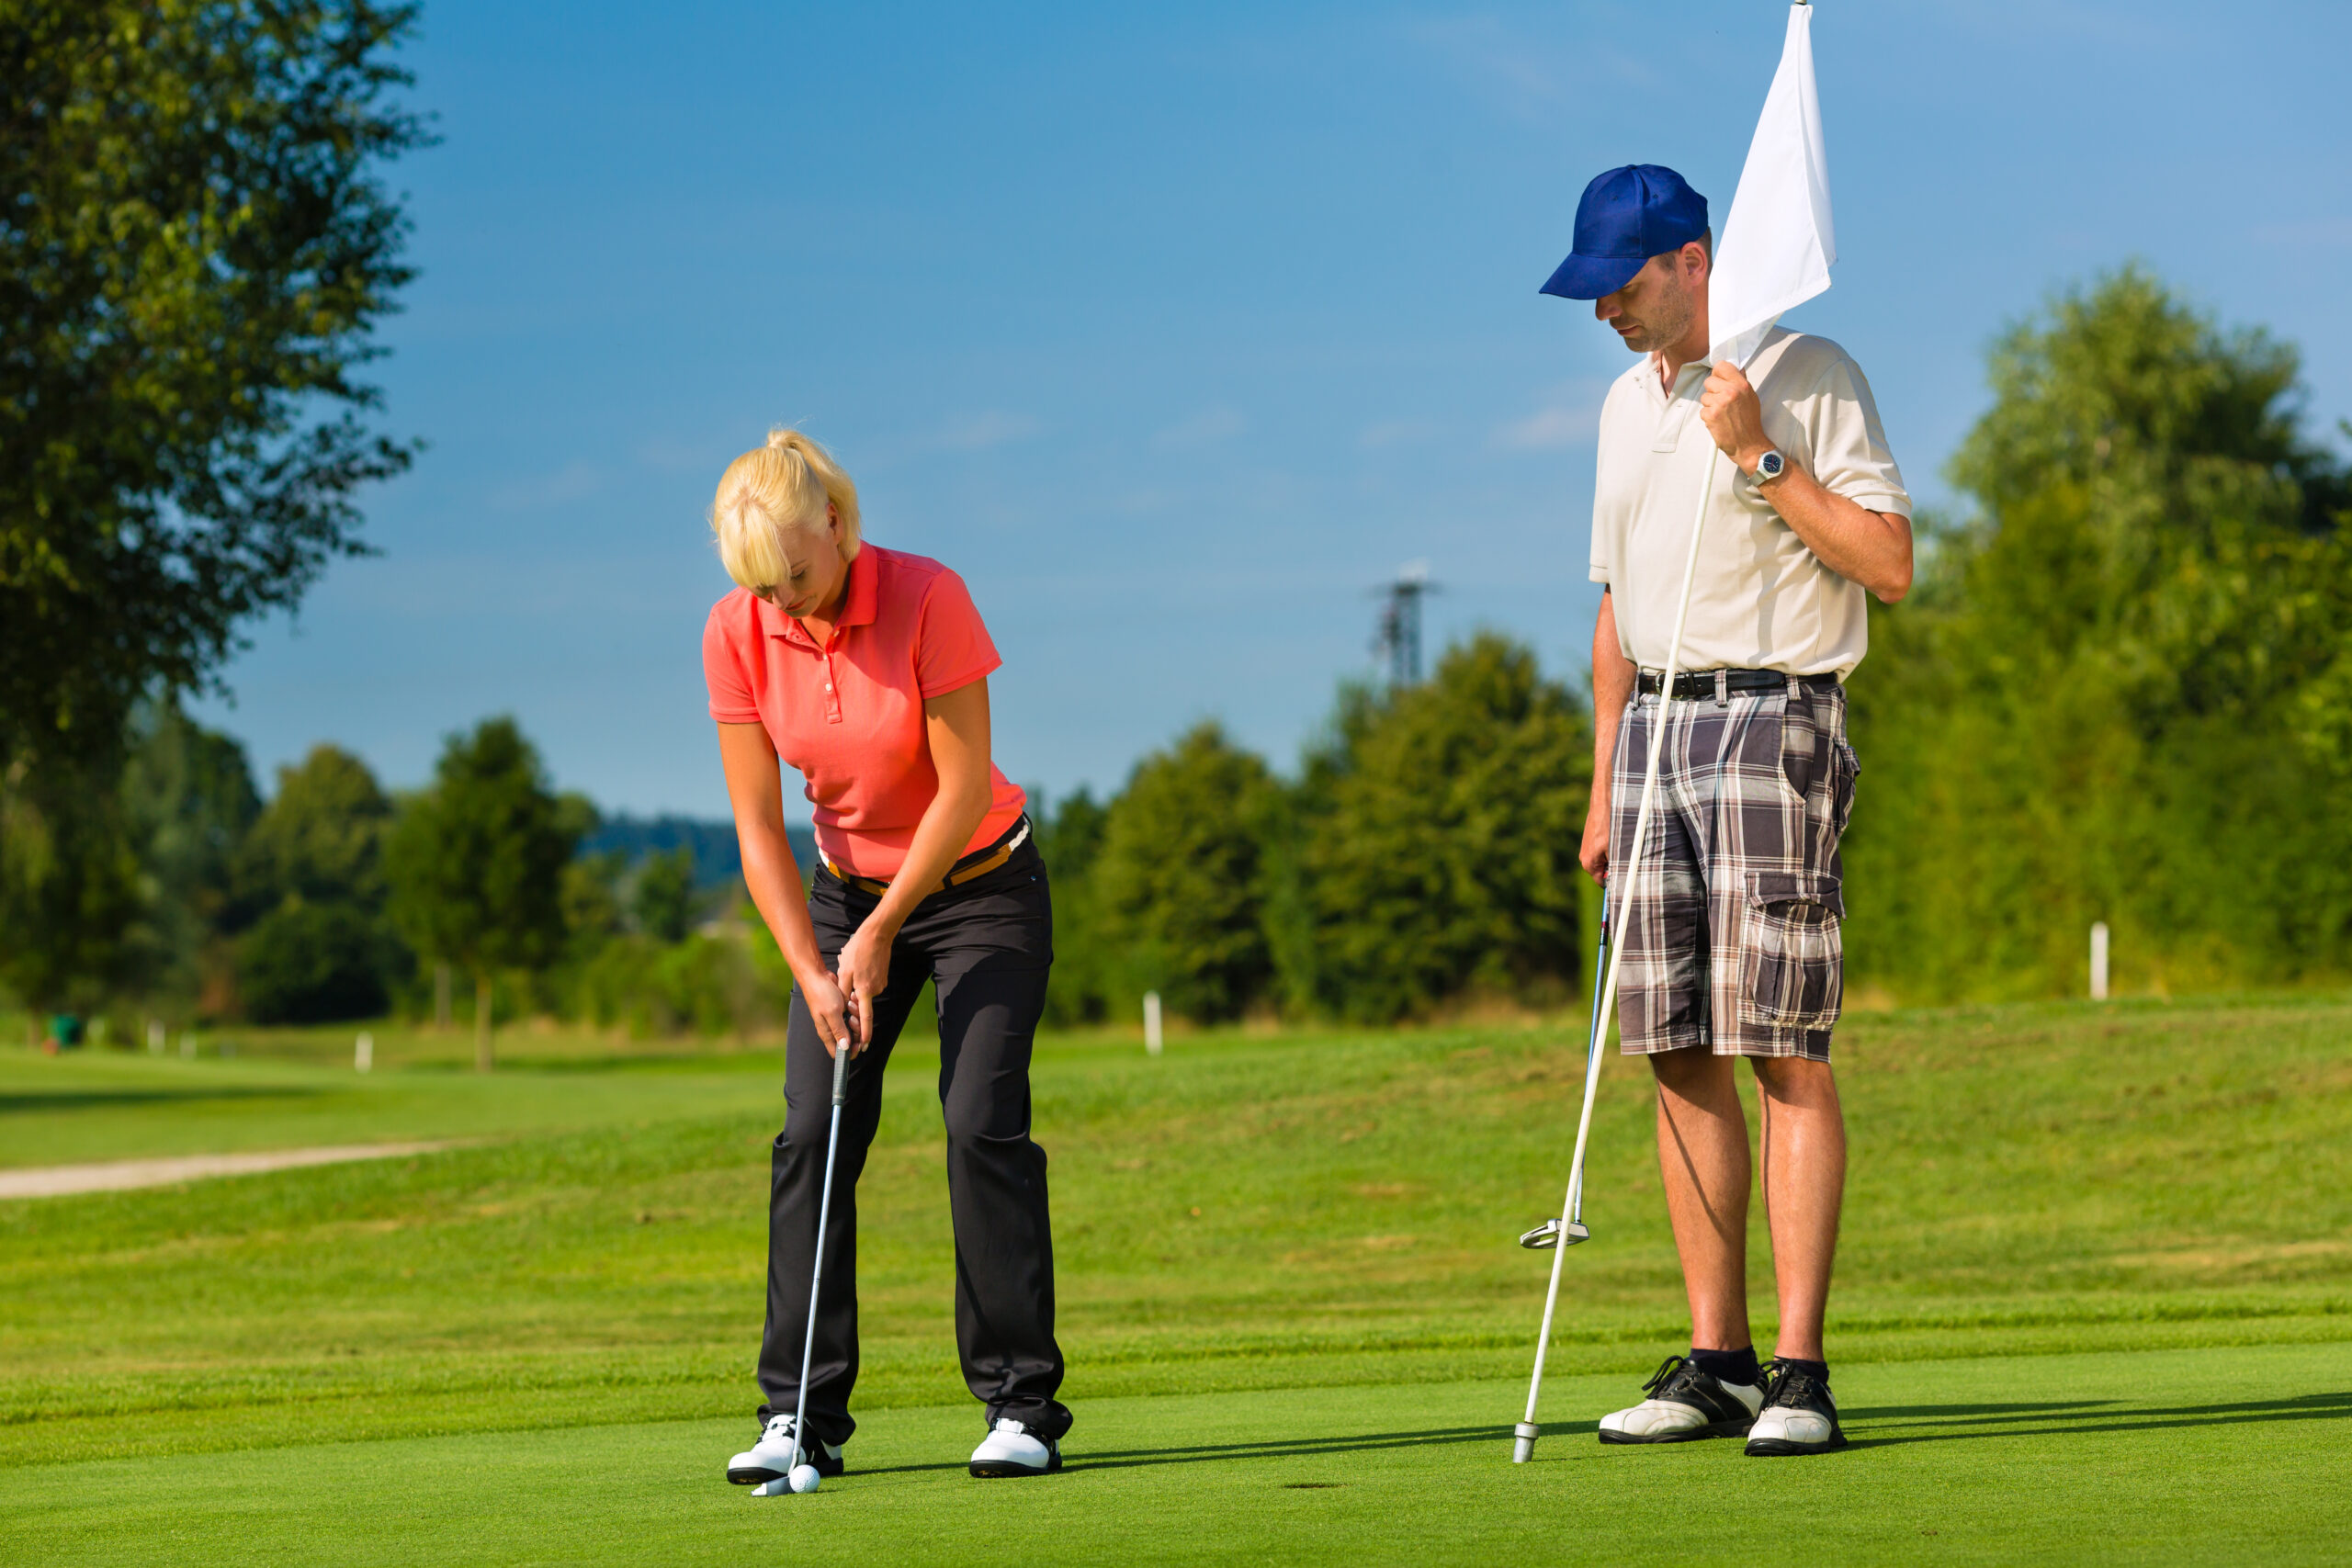 A woman putts a golf ball while a man watches and holds the flag.